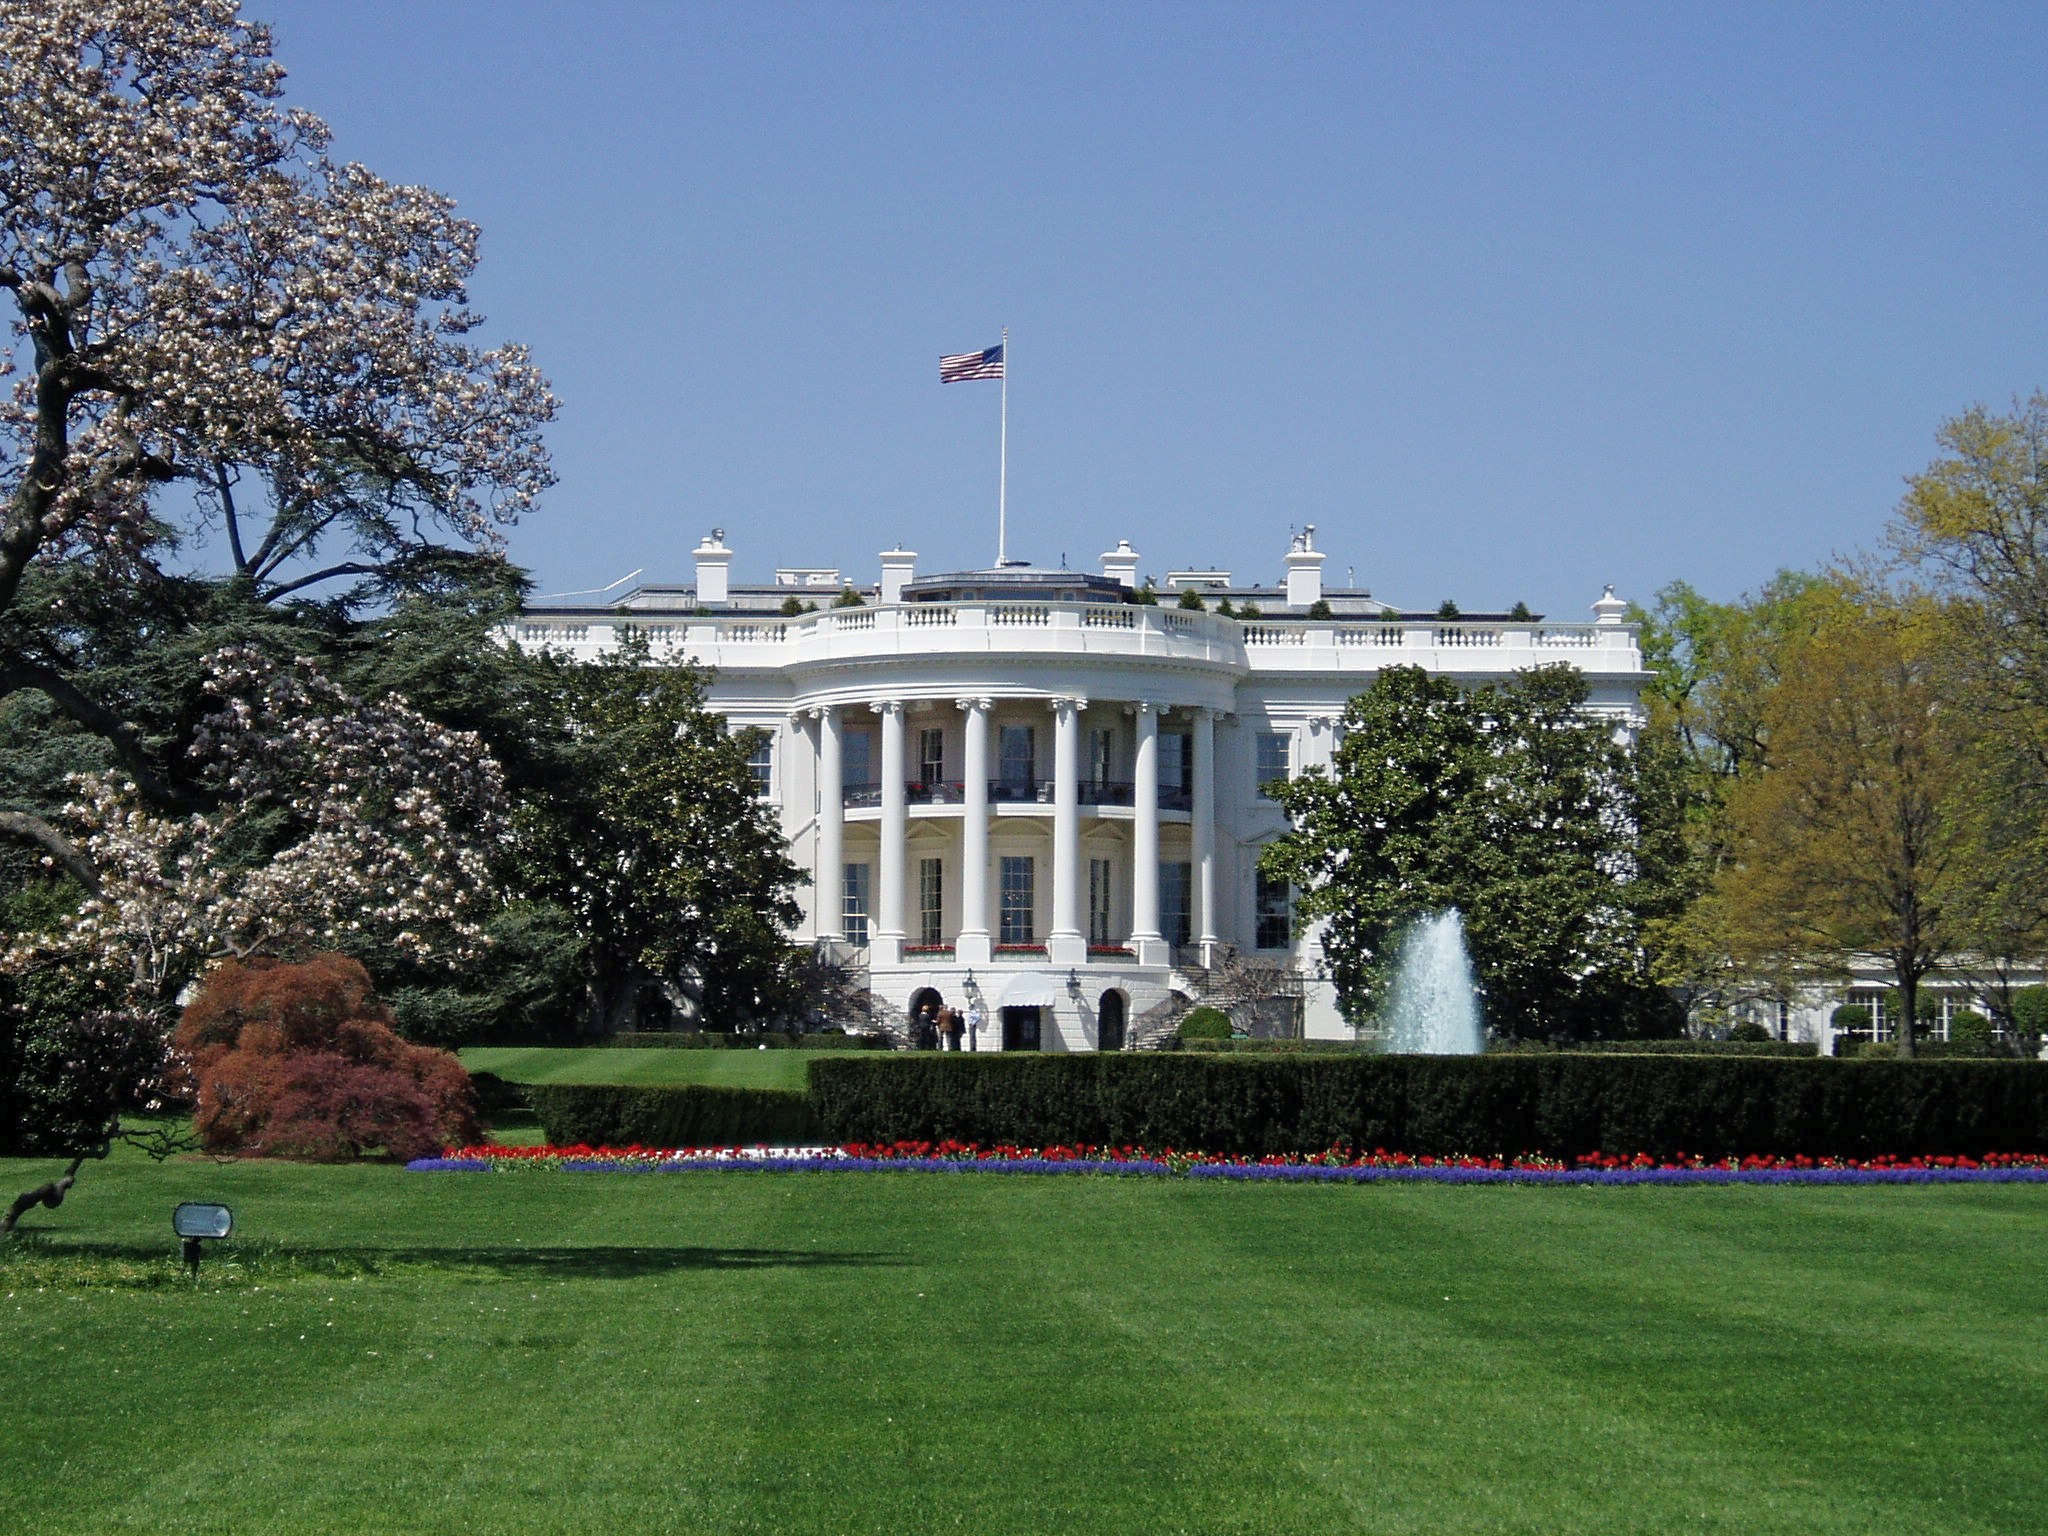 Photograph of the White House